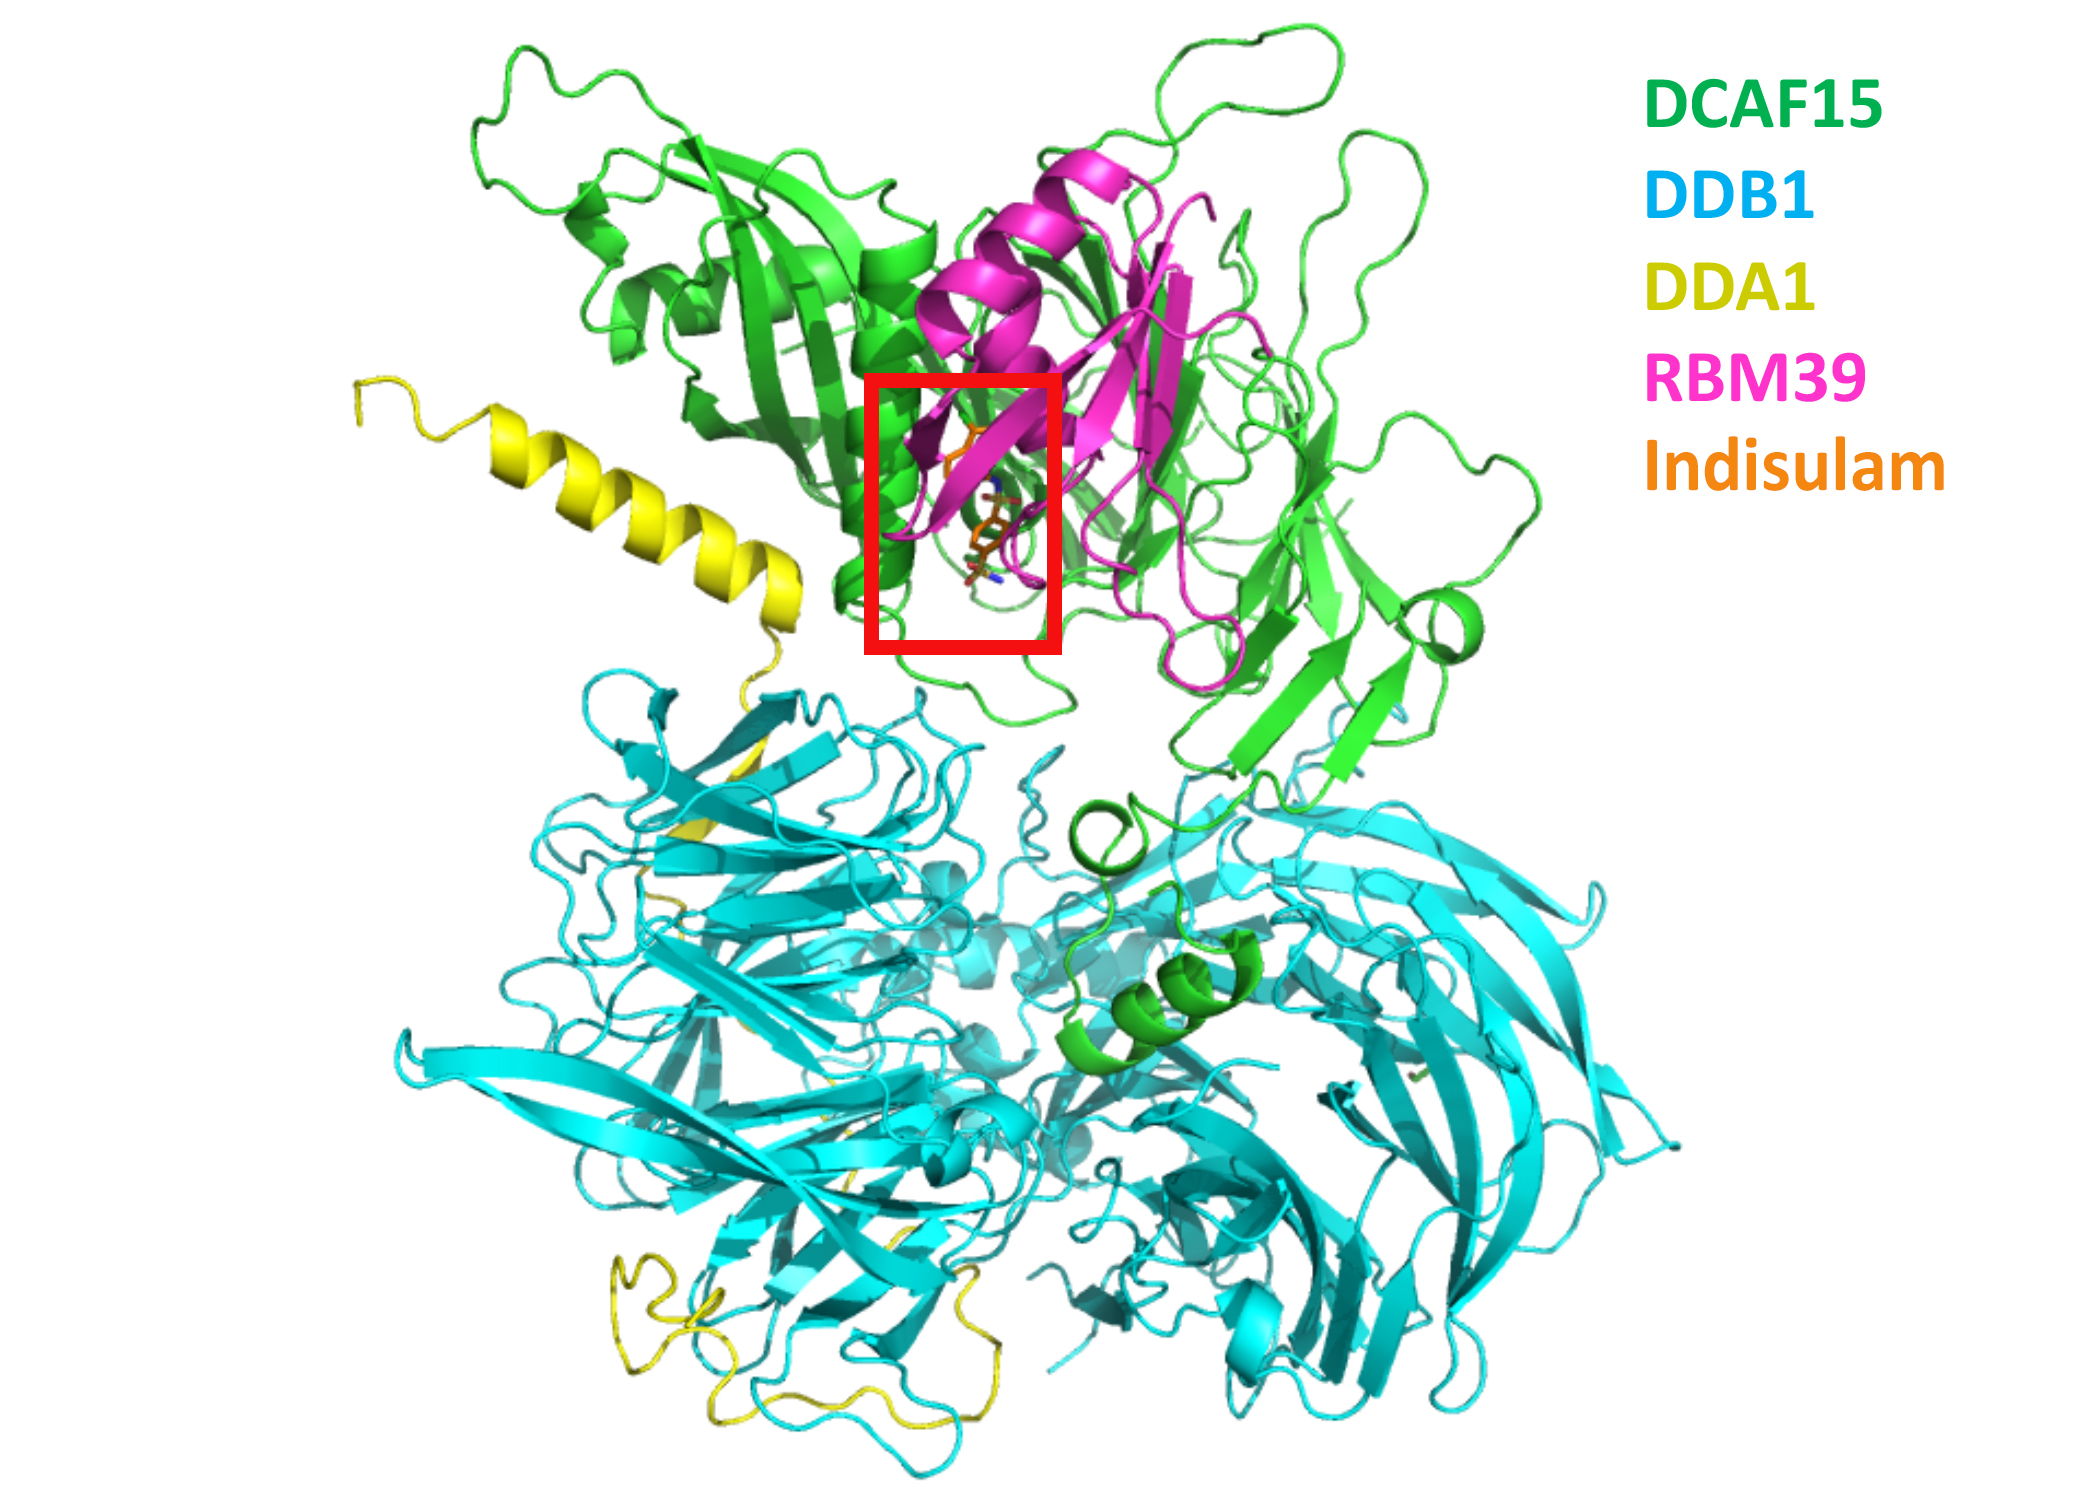 Ribbon diagram of the protein complex, with the four proteins colored green (DCAF15), cyan (DDB1), yellow (DDA1), and magenta (RBM39). The indusulam molecule is colored orange and is highlighted by a red box.